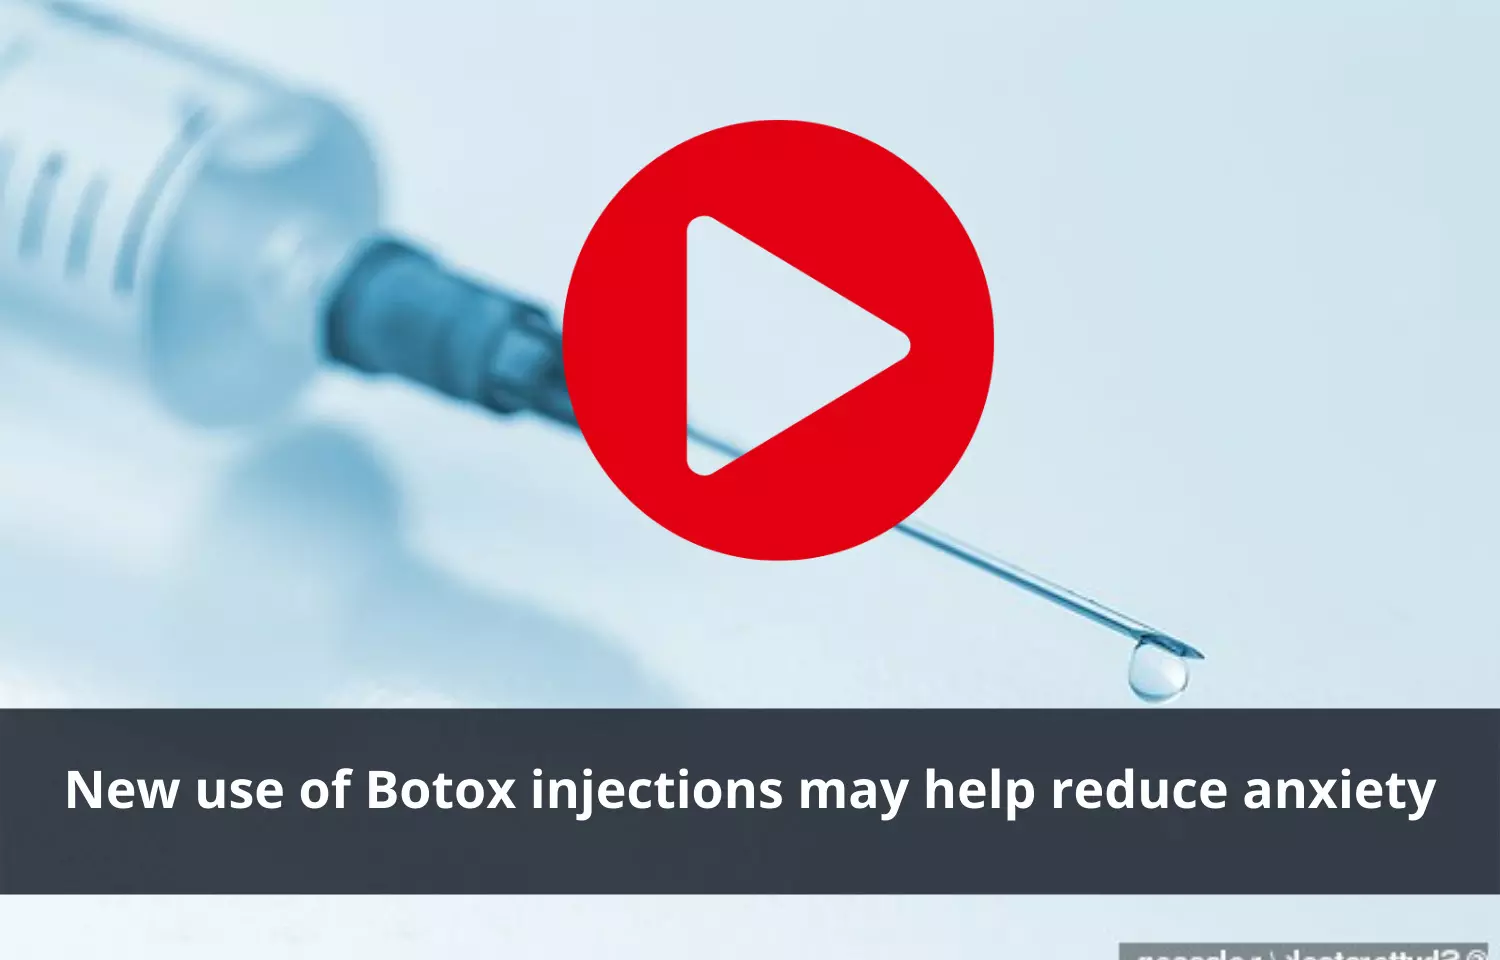 Botox injections tied to reduction in anxiety